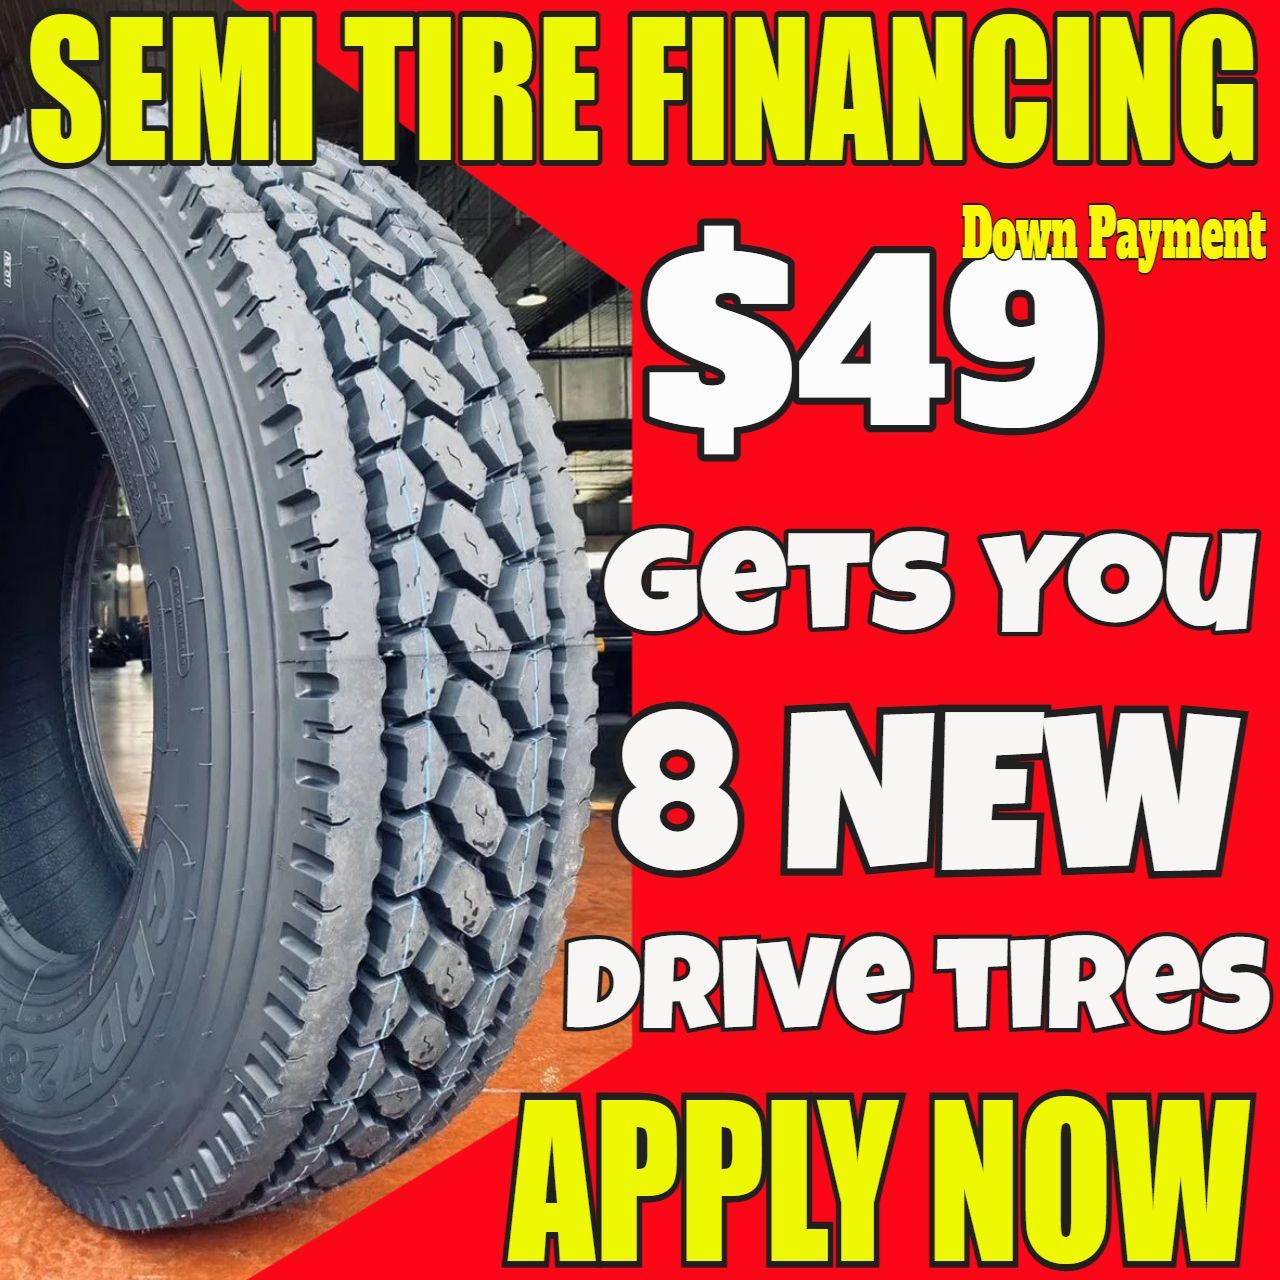 Commercial semi-truck tires Charleston, SC. 18-wheeler Heavy-duty Big-Rig trucking tires at Charleston, SC. Cheap tractor-trailer auto vehicle prices in Charleston, SC